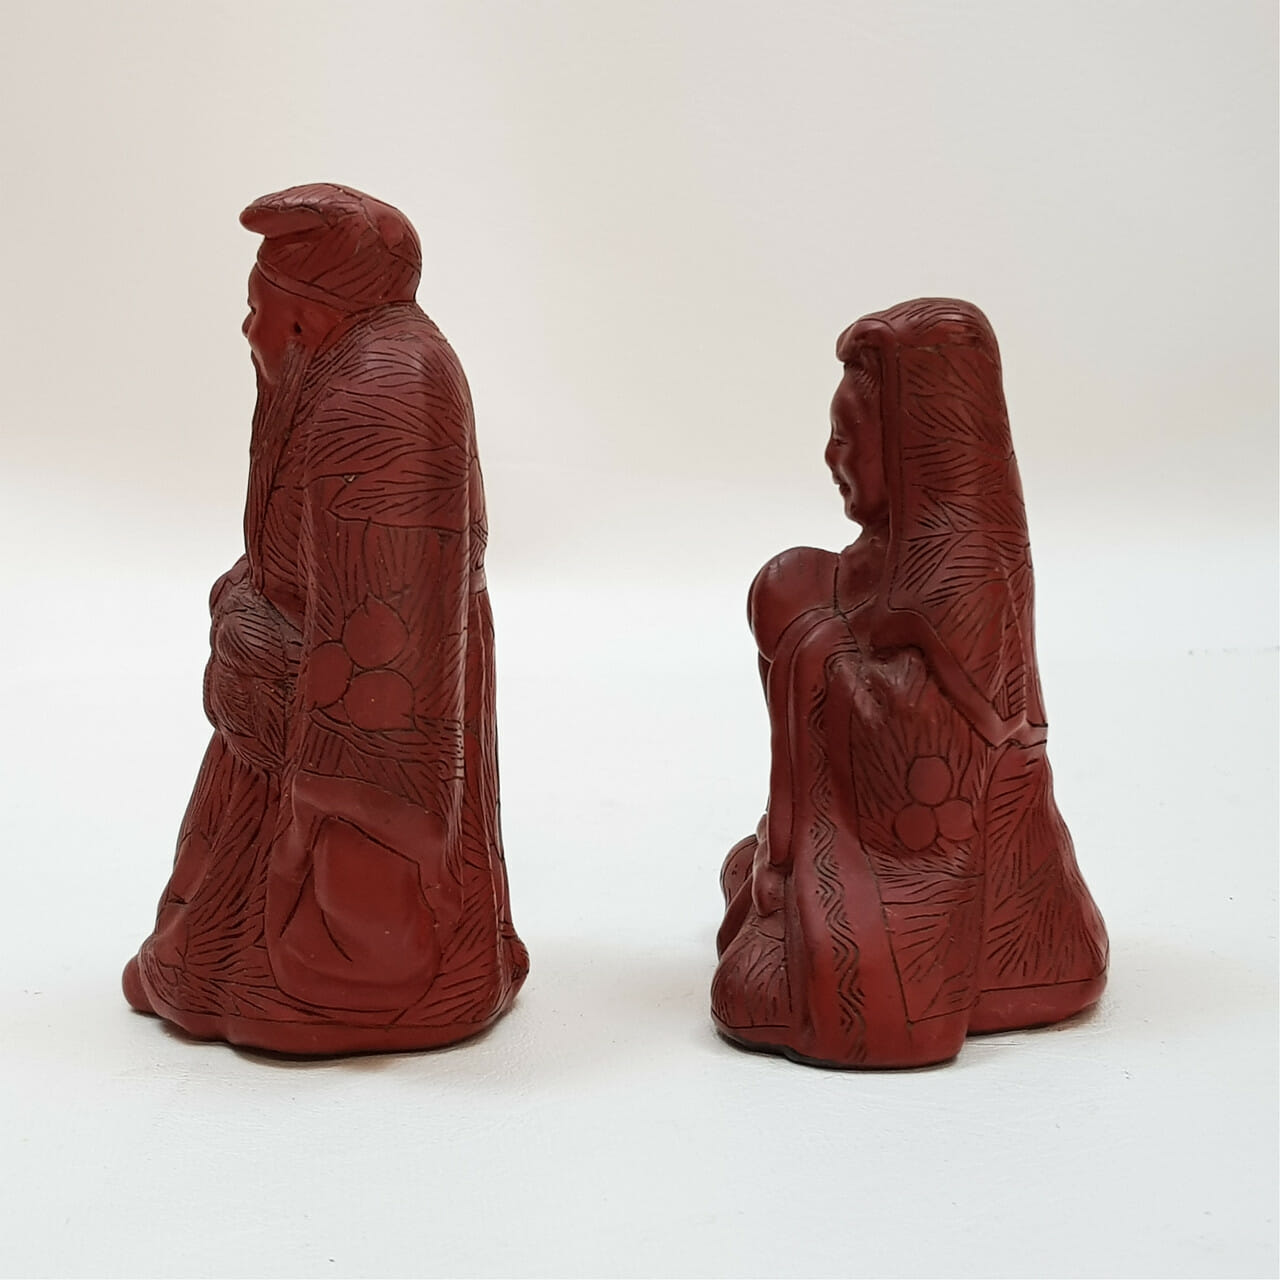 PAIR OF CHINESE CARVINGS - MAN & WOMAN STATUE / FIGURES #47011